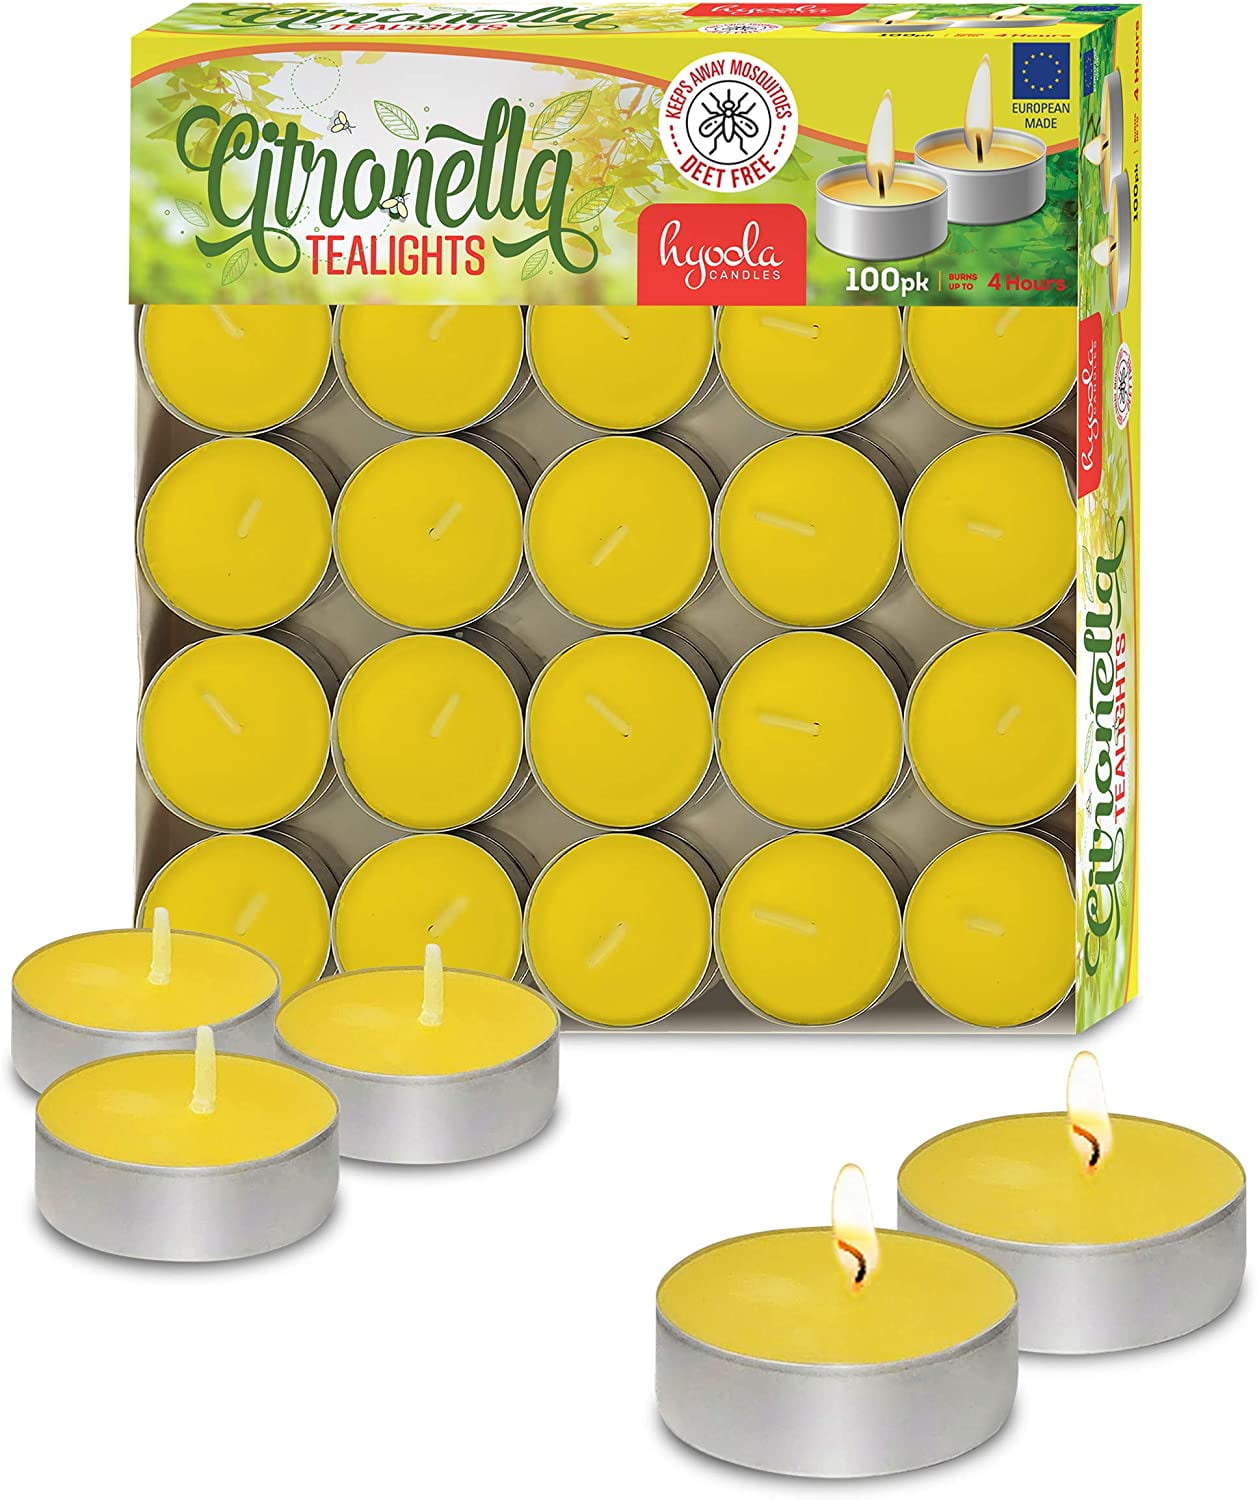 Citronella Tealight Candles Mosquito Fly Insect Repeller Pack of 25 